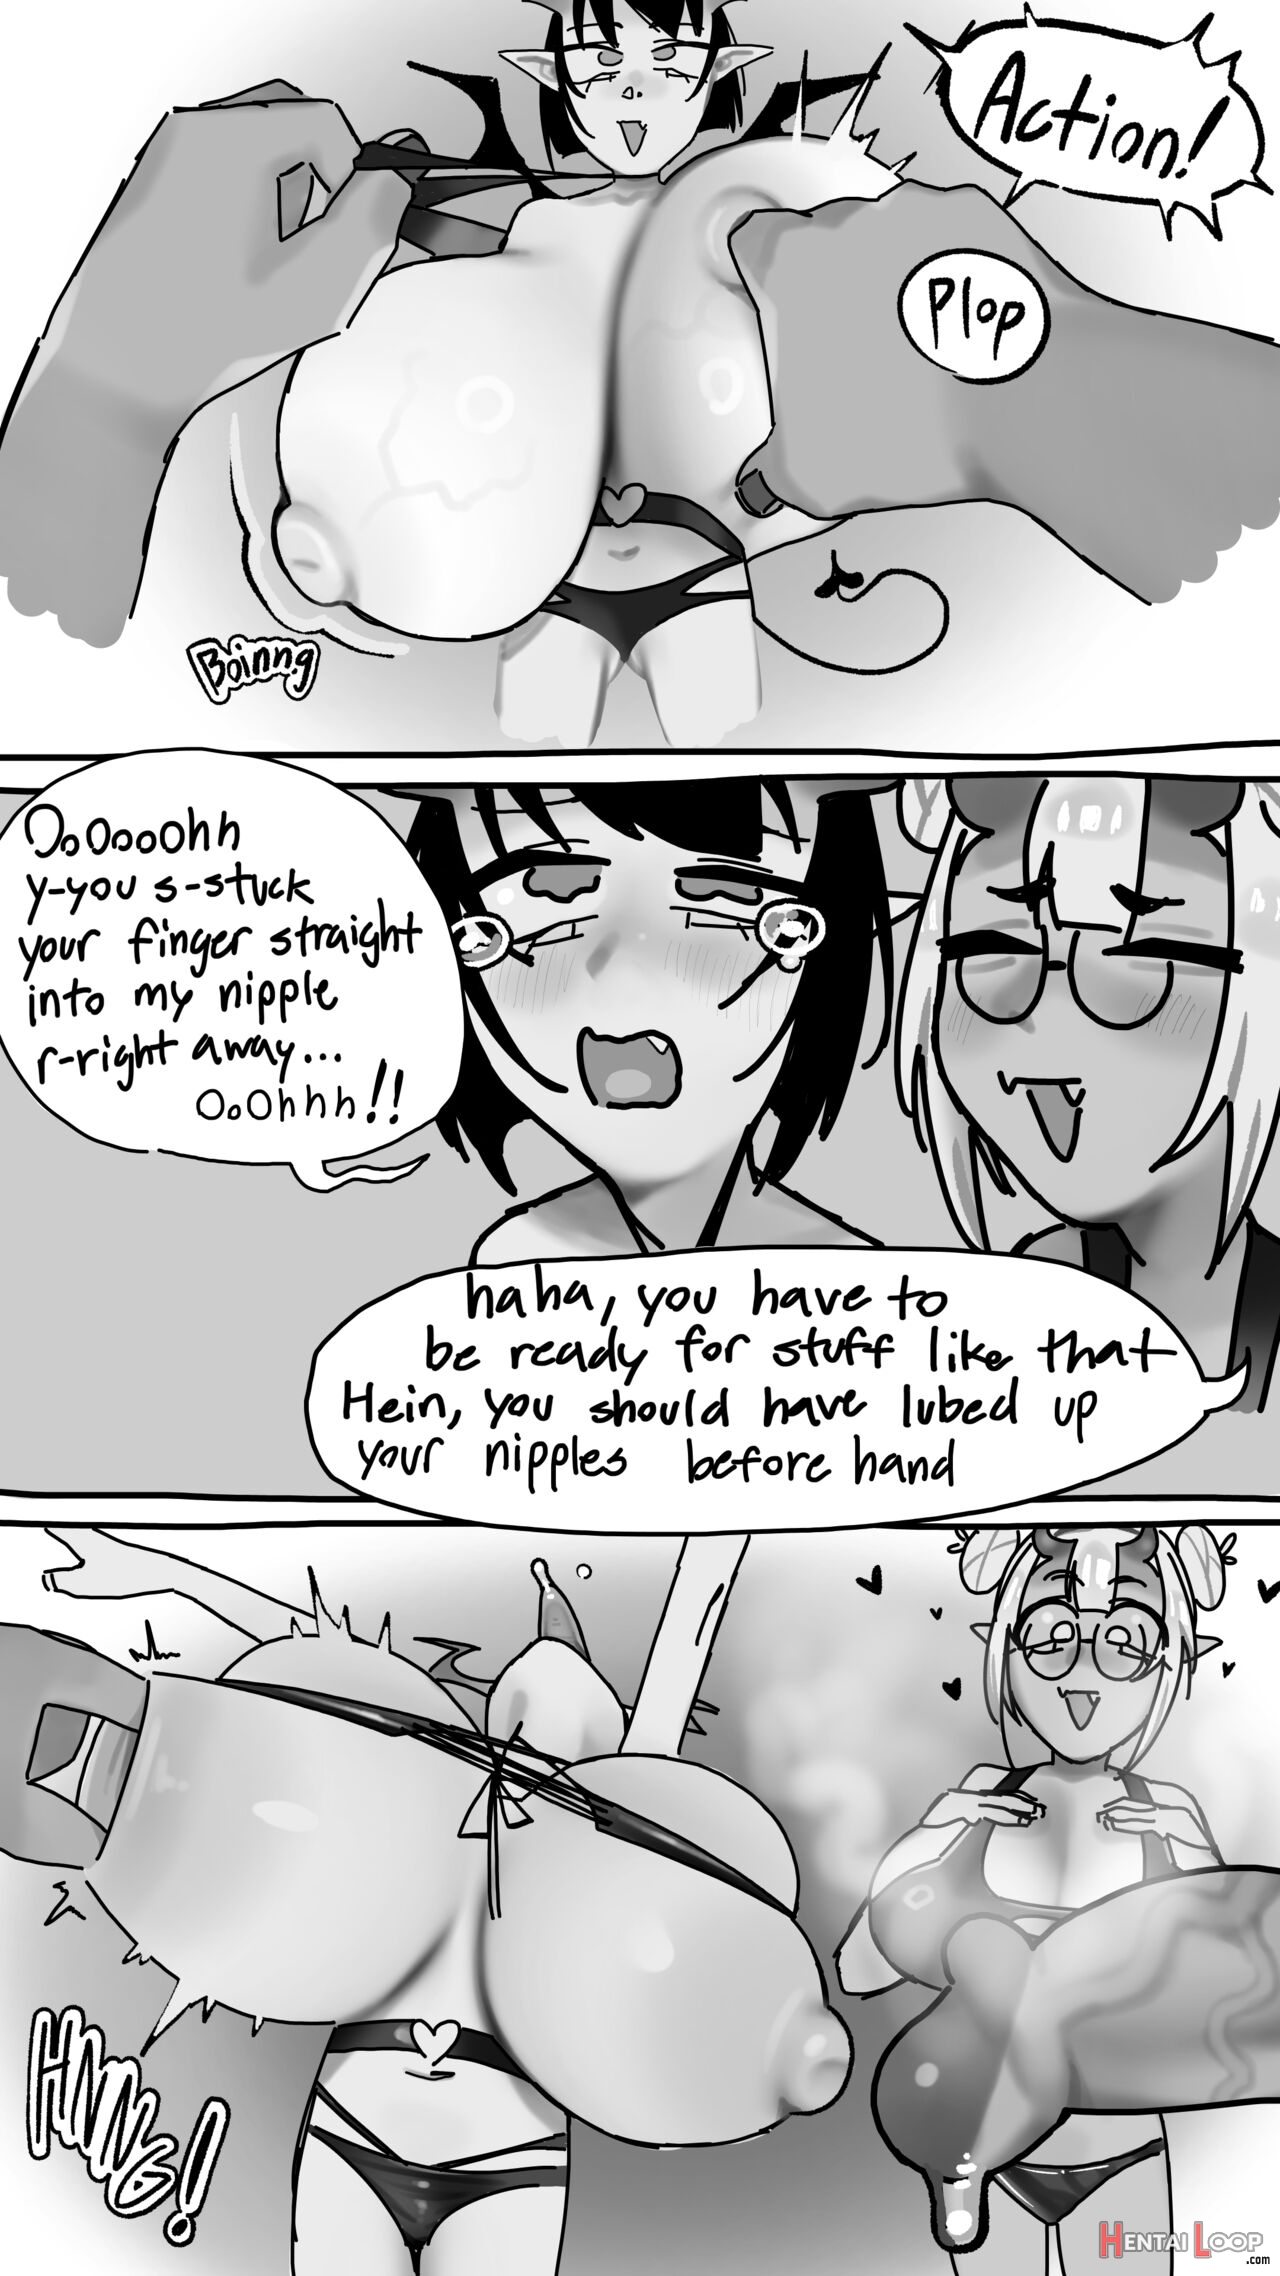 Succubus Story - Decensored page 11